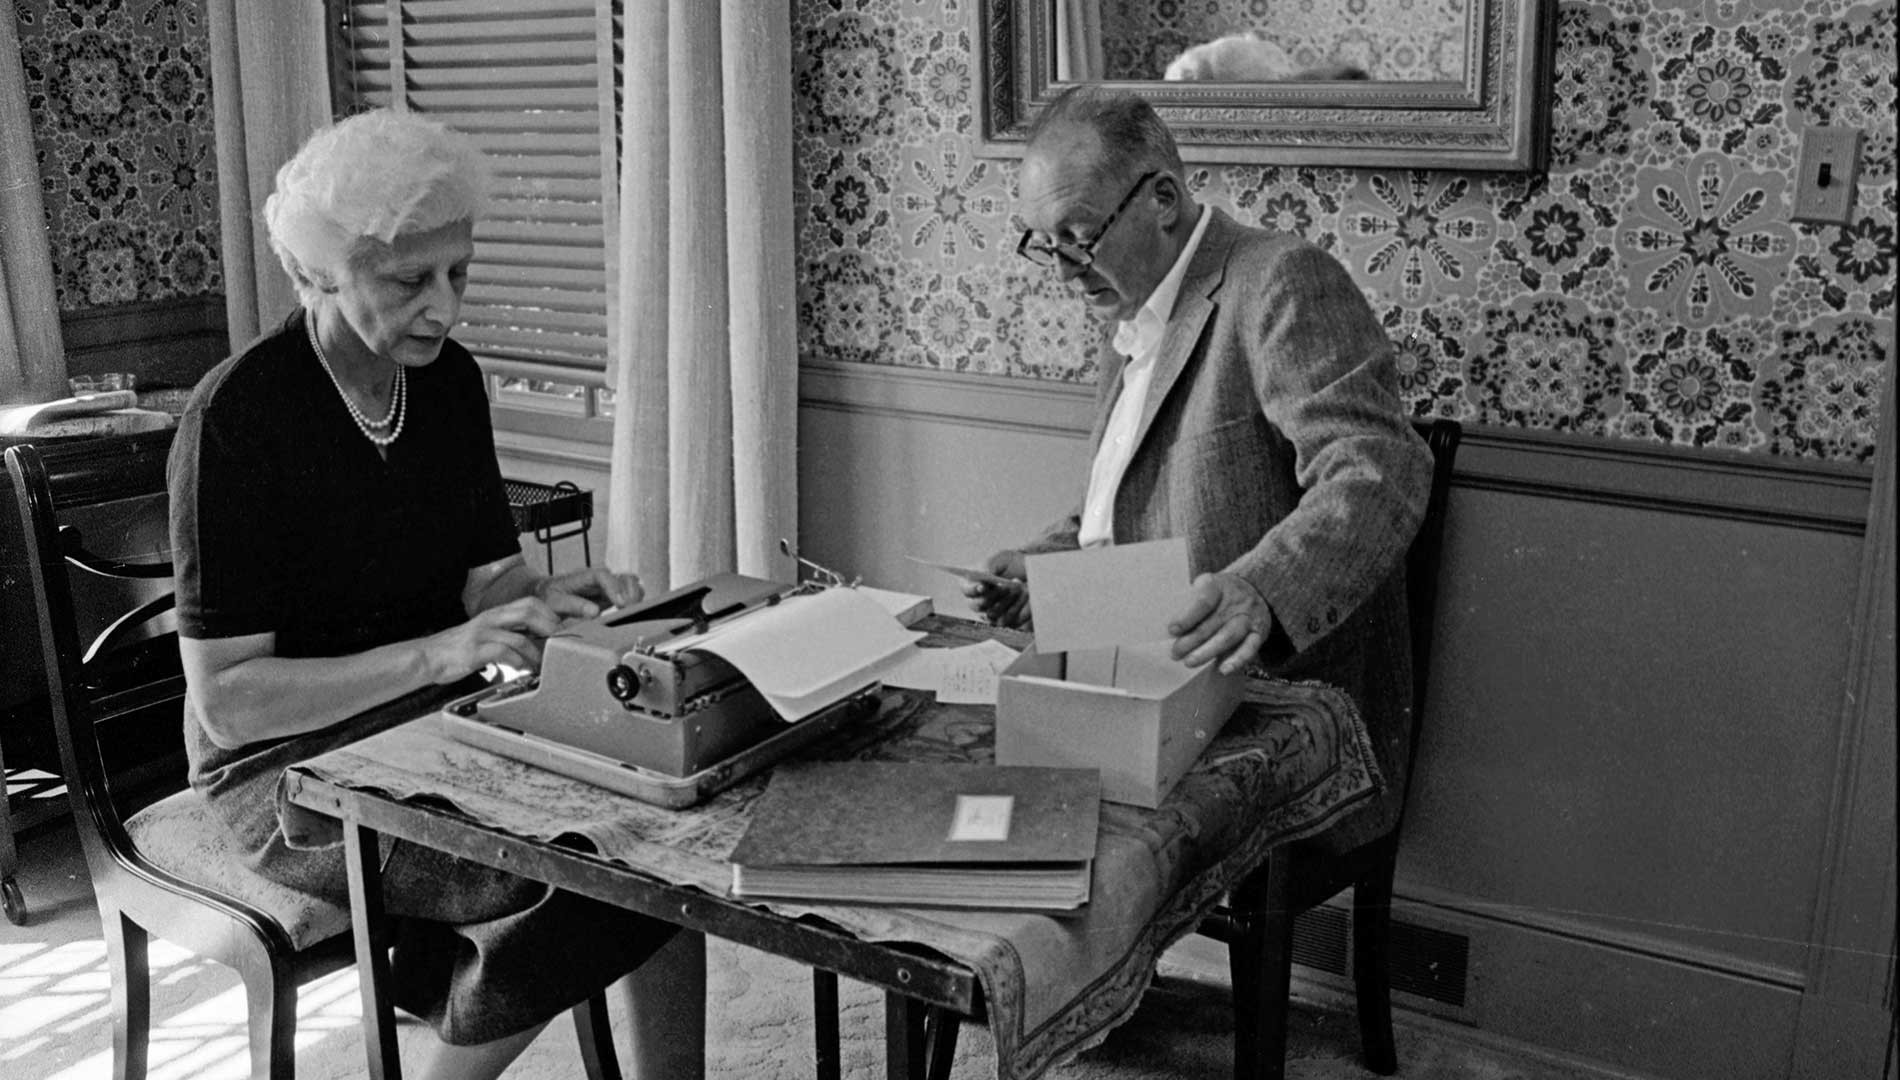 After Nabokov's death, Vera kept spending up to 6 hours a day behind the typewriter, translating his novels